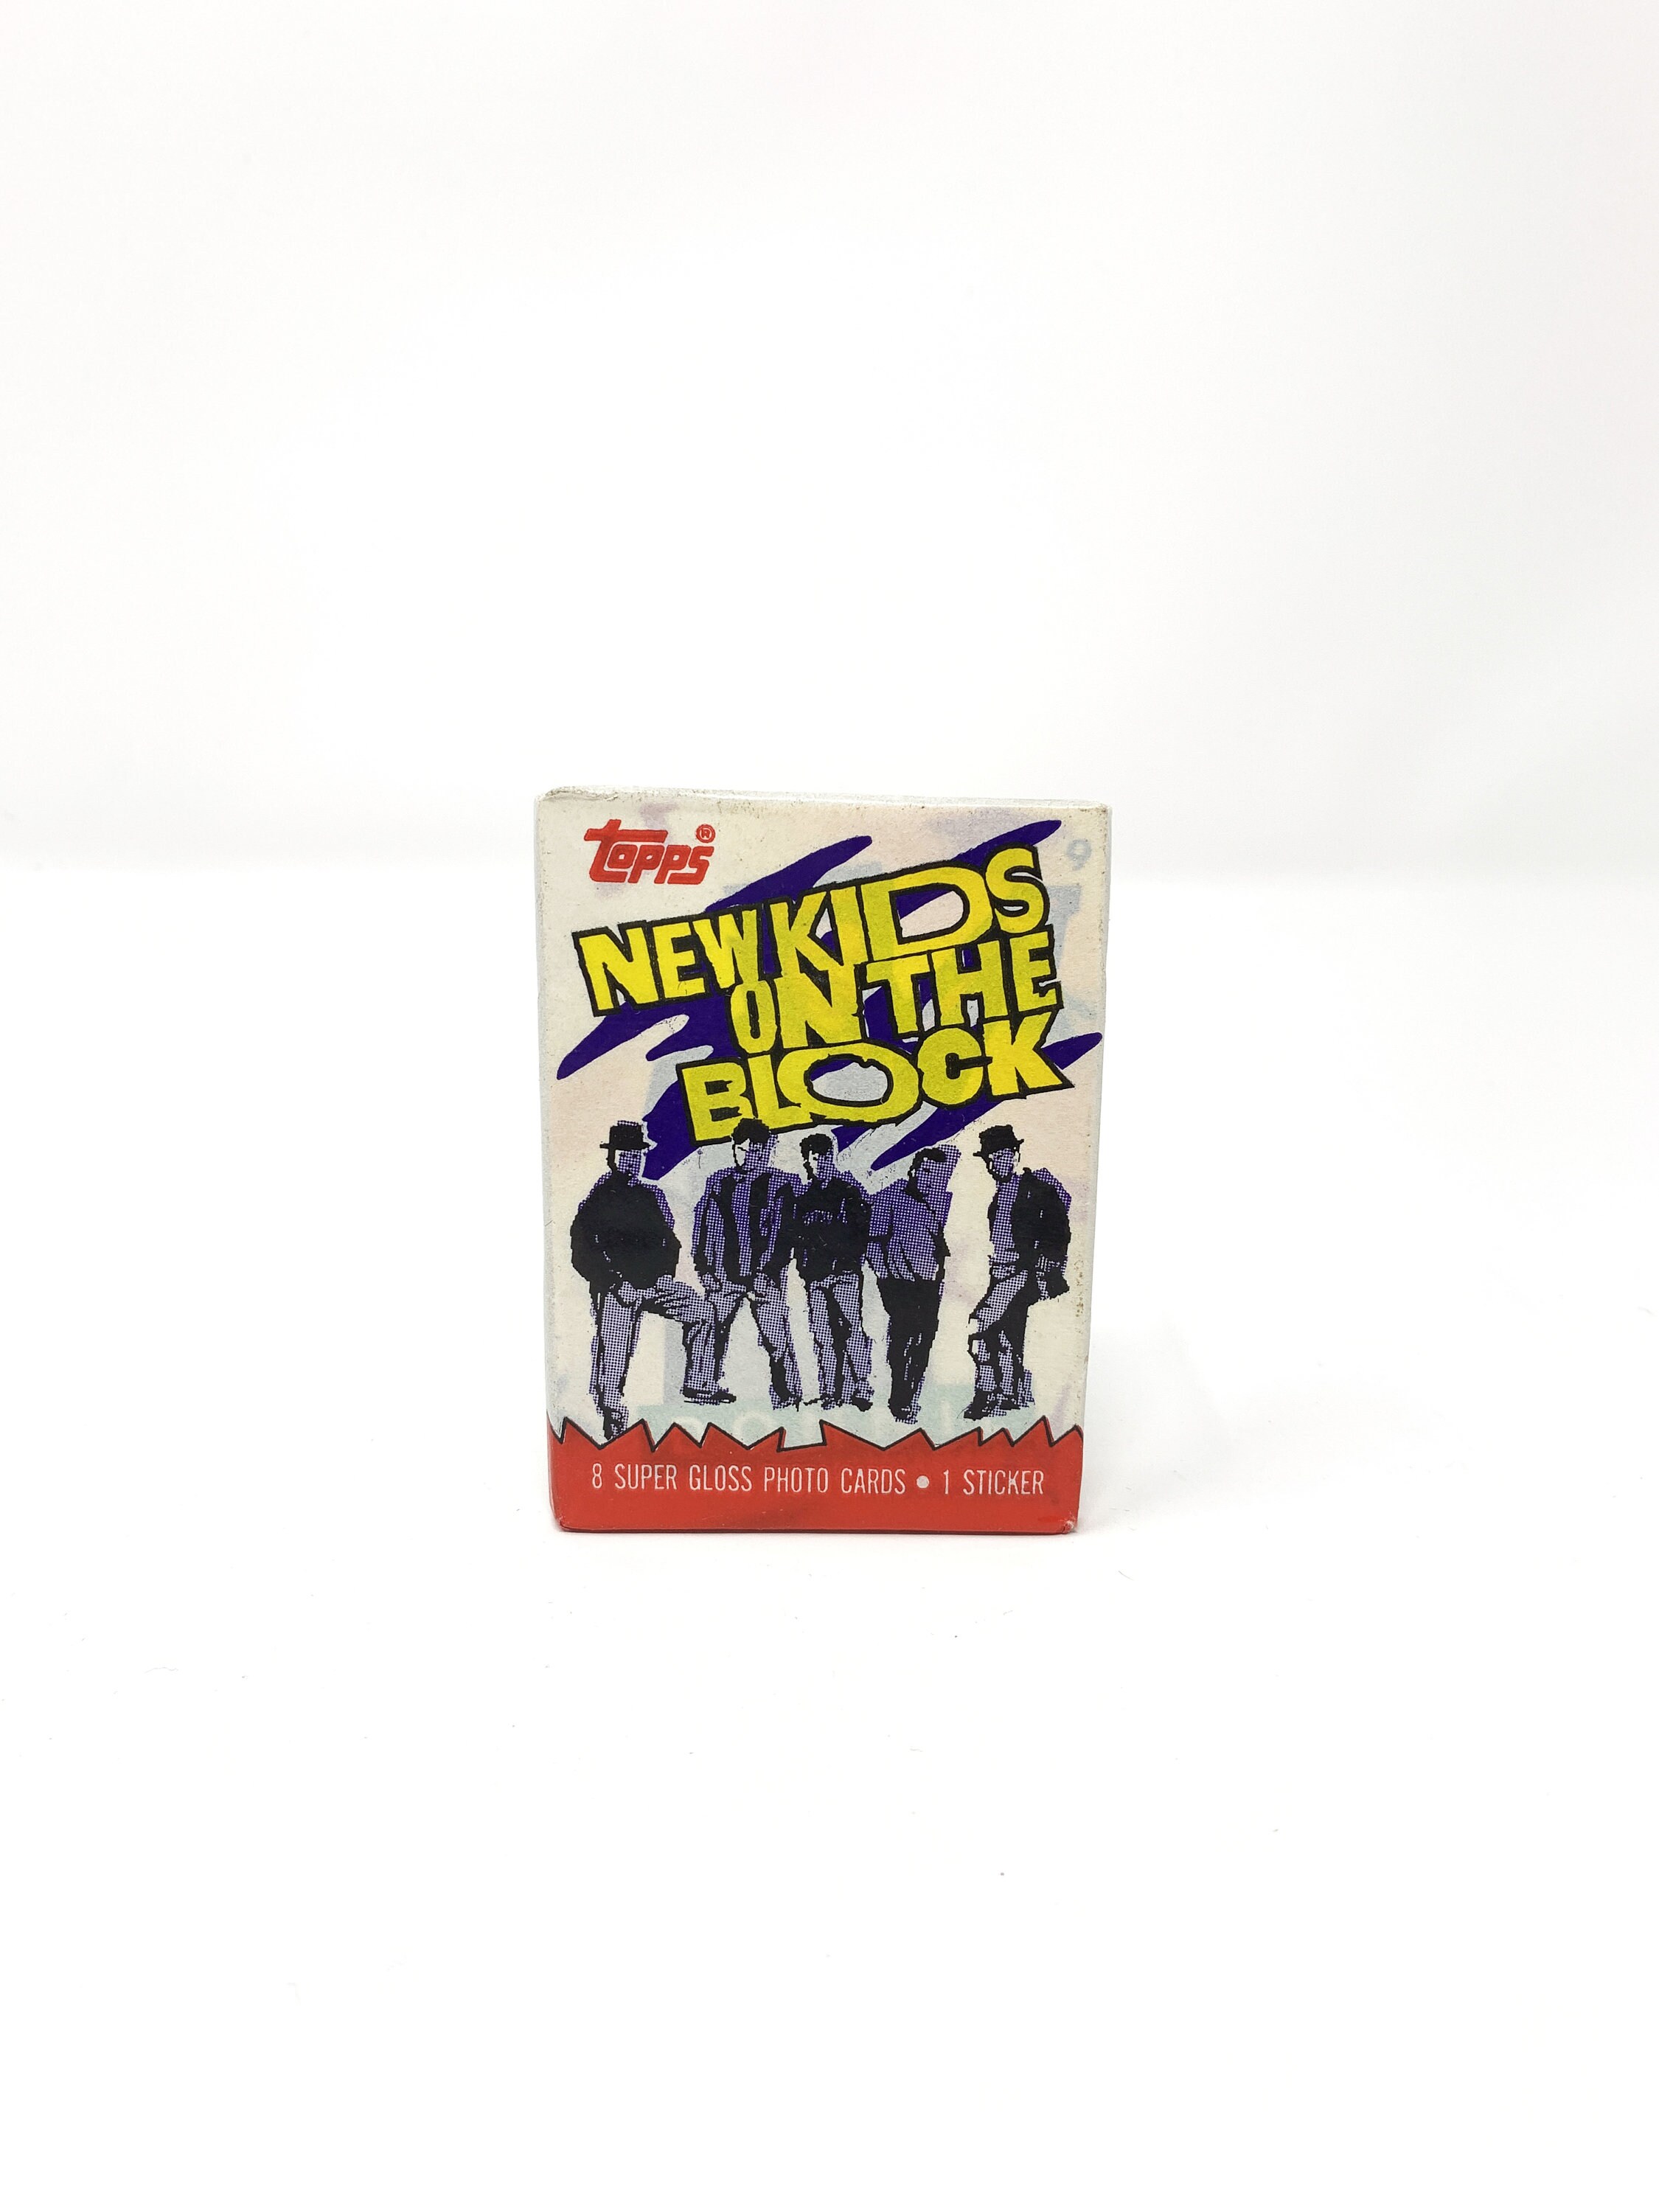 4 UNOPENED PACK! Trading Cards!! 1990 Topps NEW KIDS ON THE BLOCK Series 2 